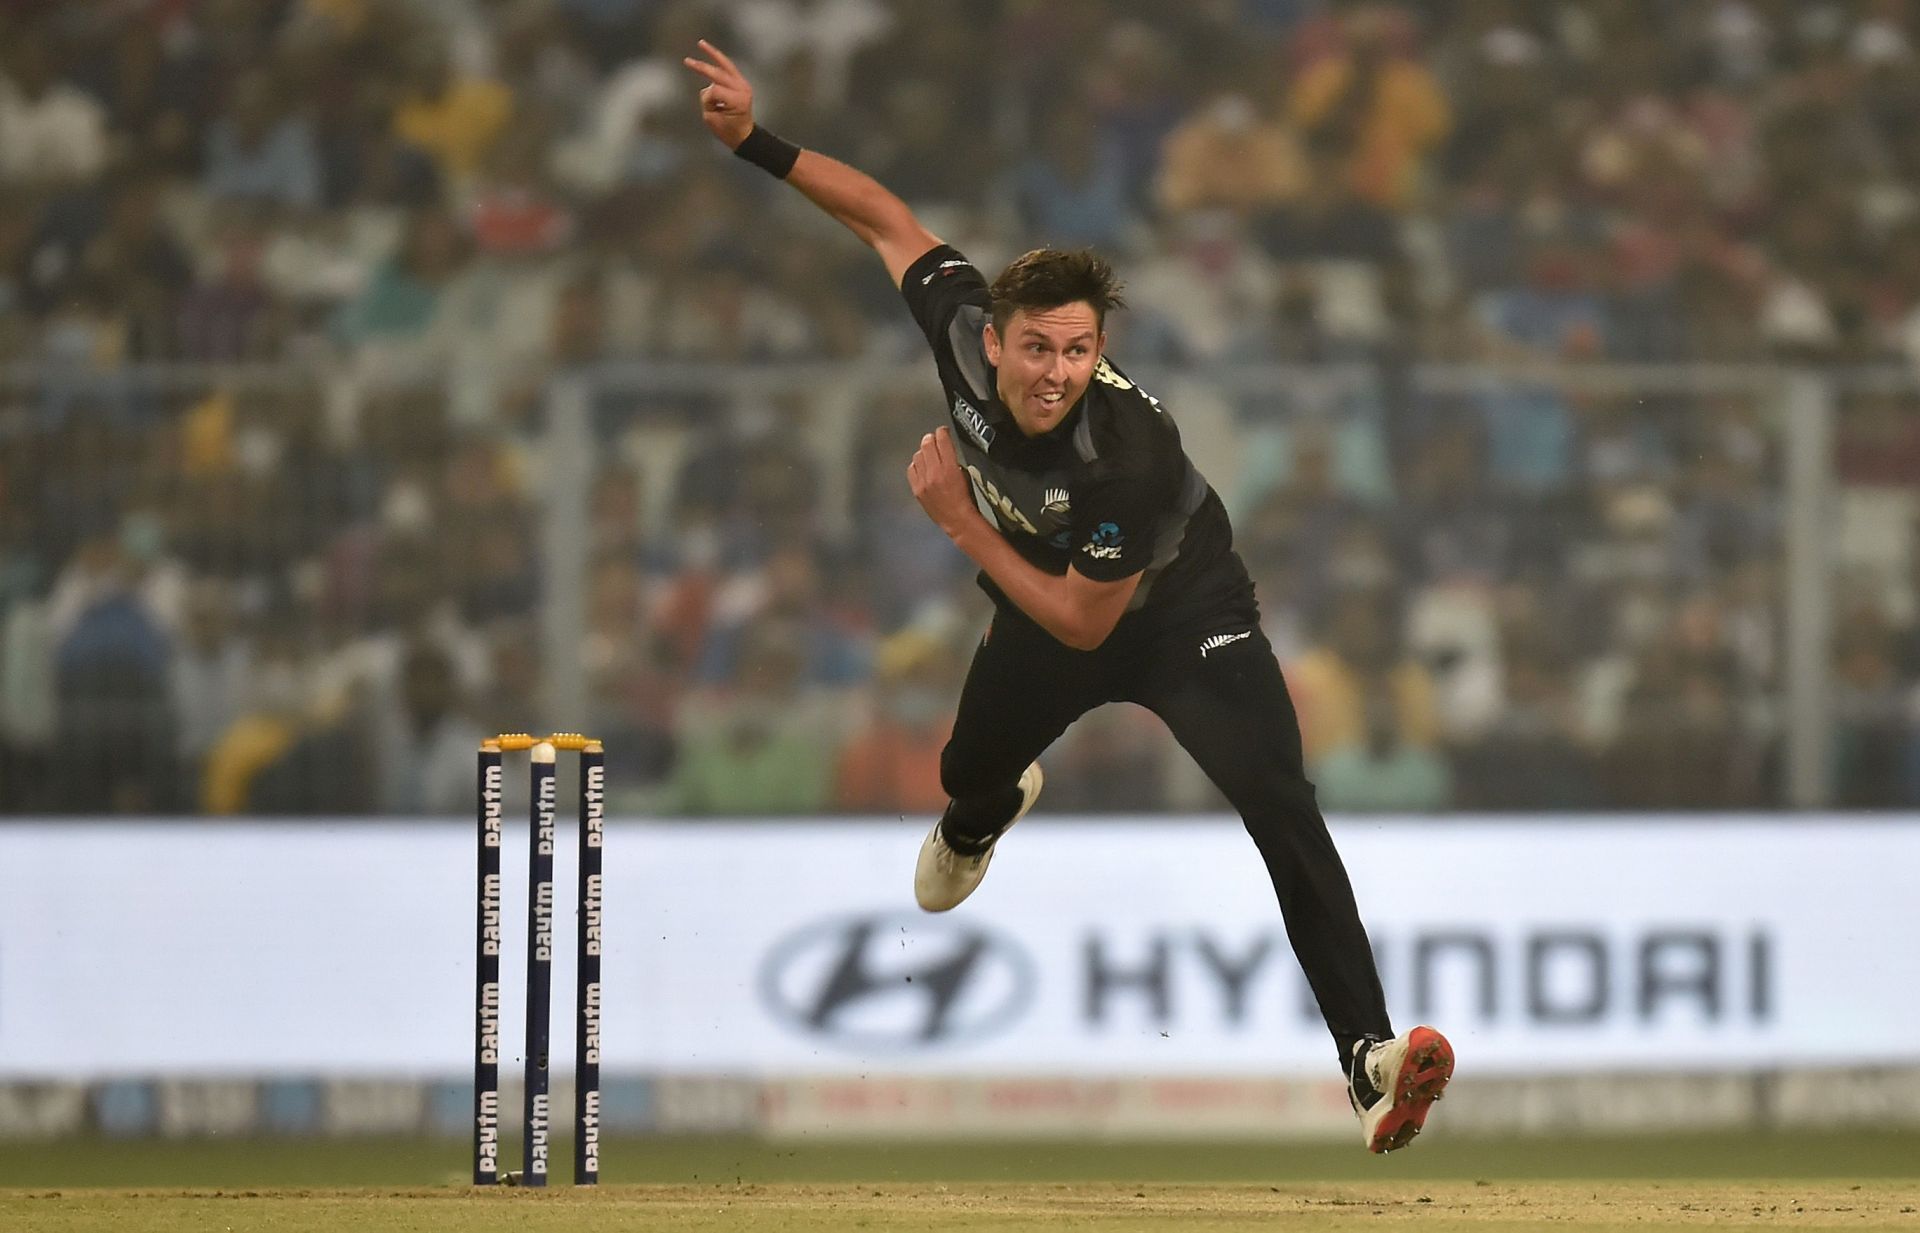 Trent Boult has opted not to be a contracted player with the New Zealand cricket board.